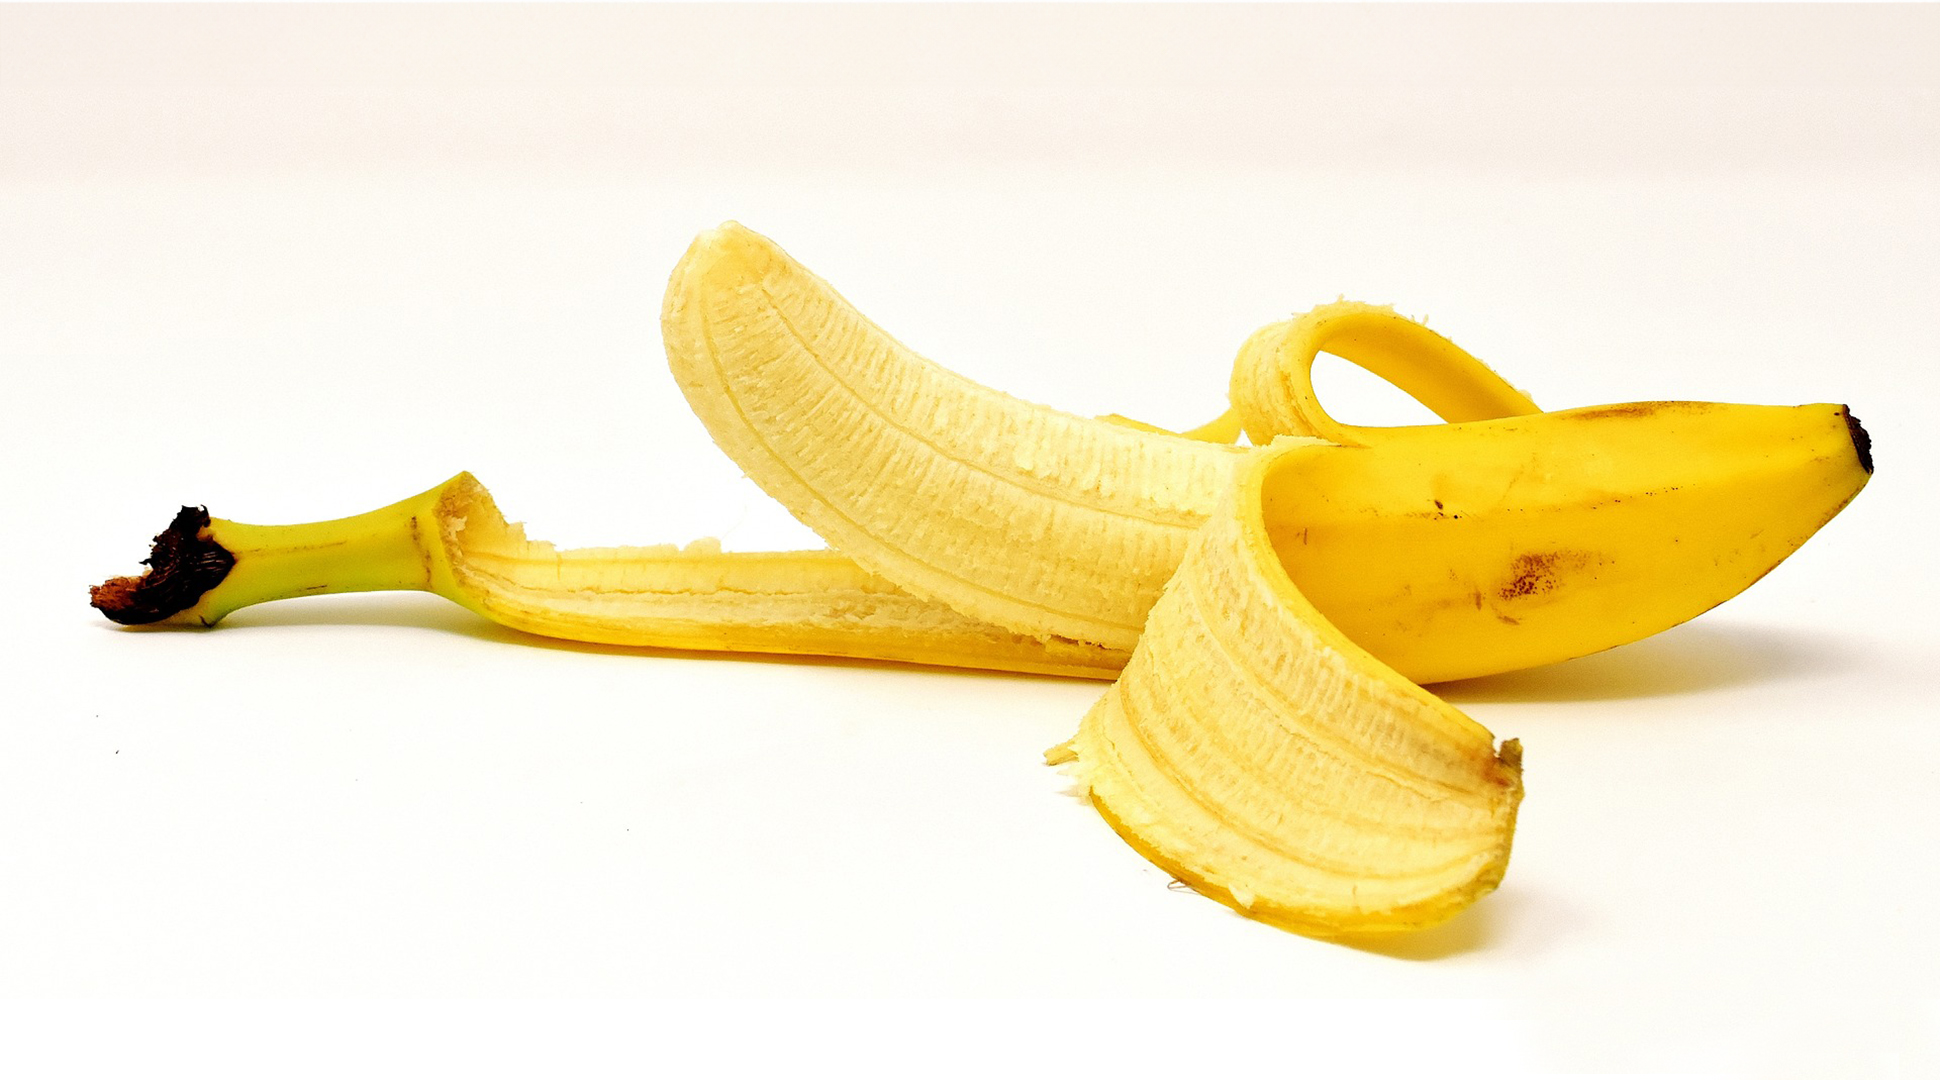 Bananas are berries and other fun food facts